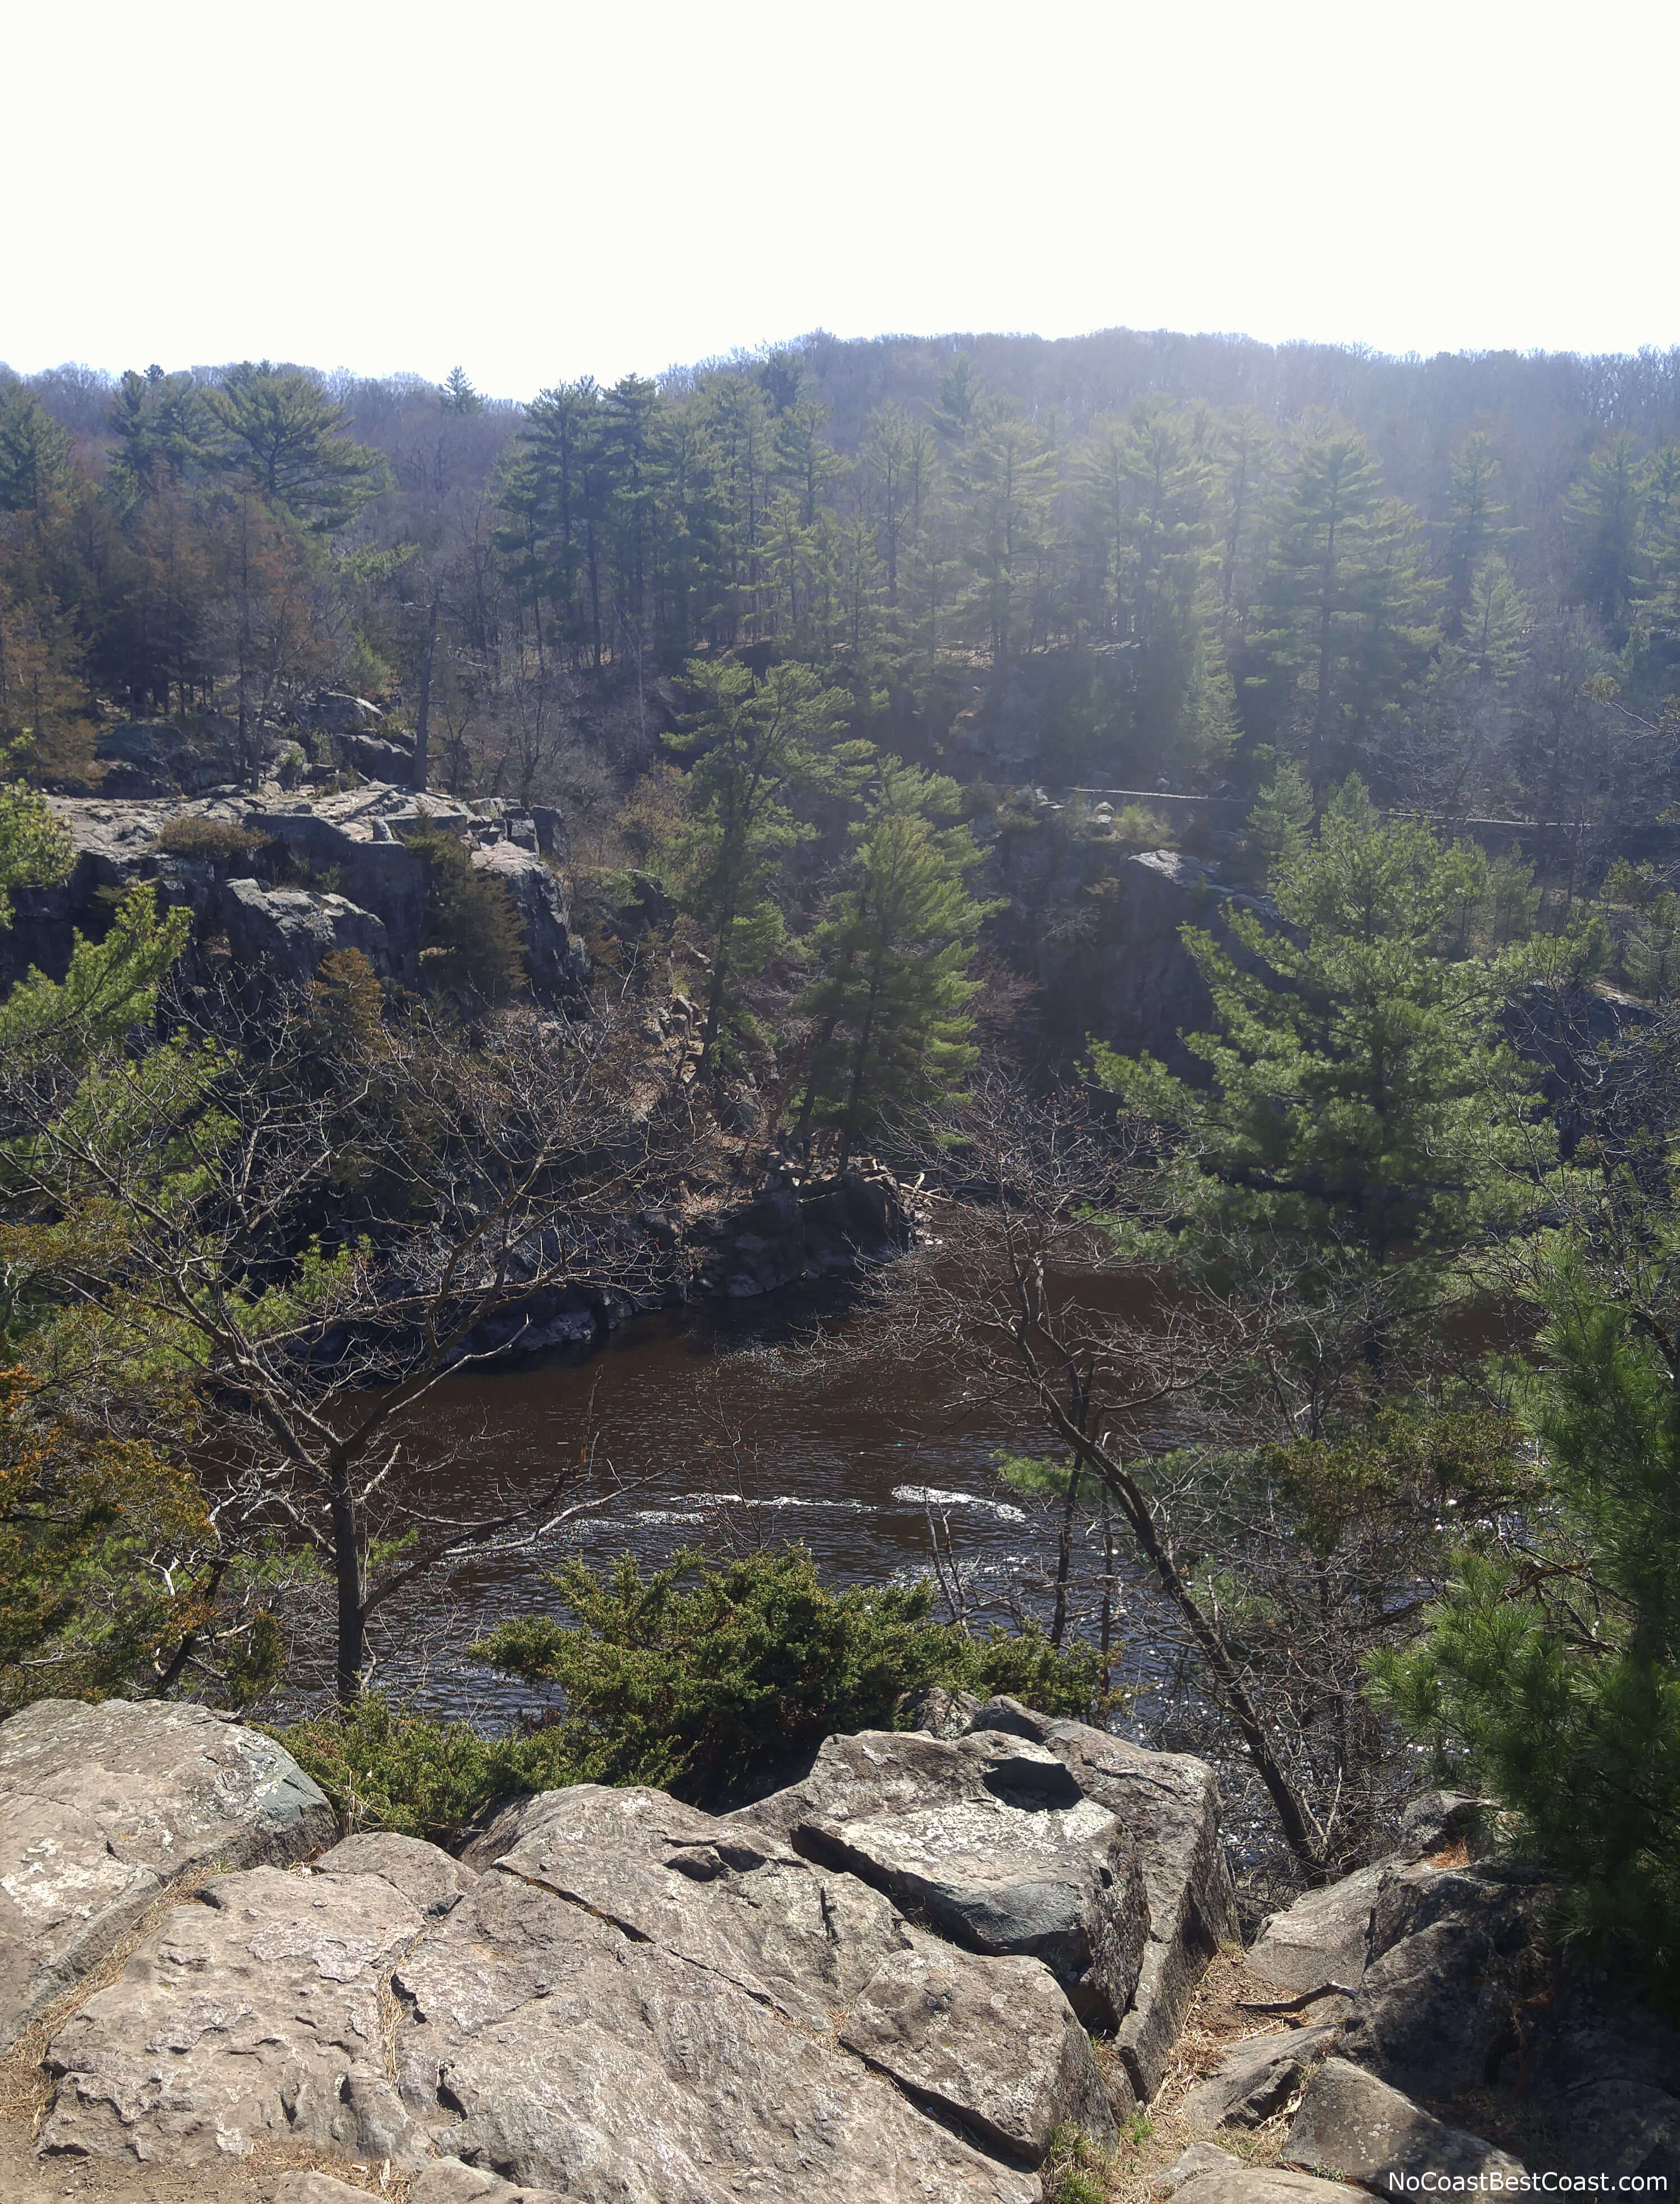 An overlook of the St. Croix River